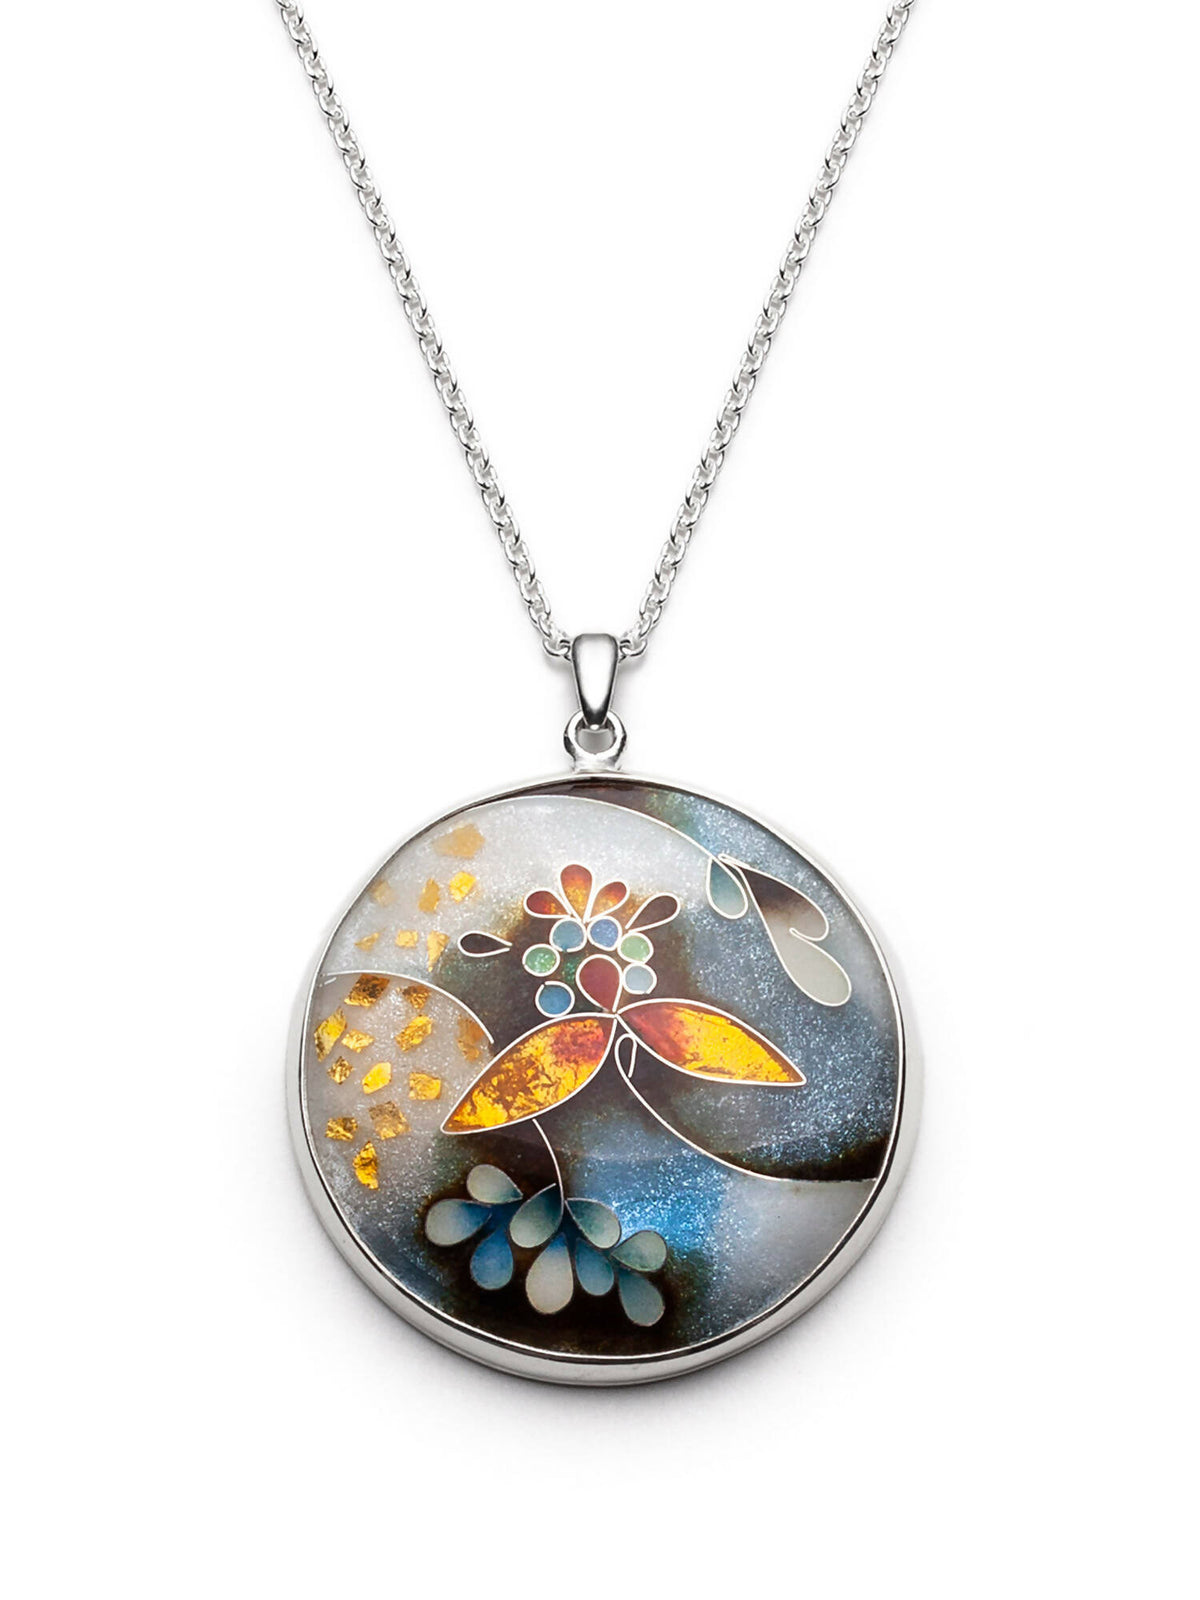 Winter bloom necklace